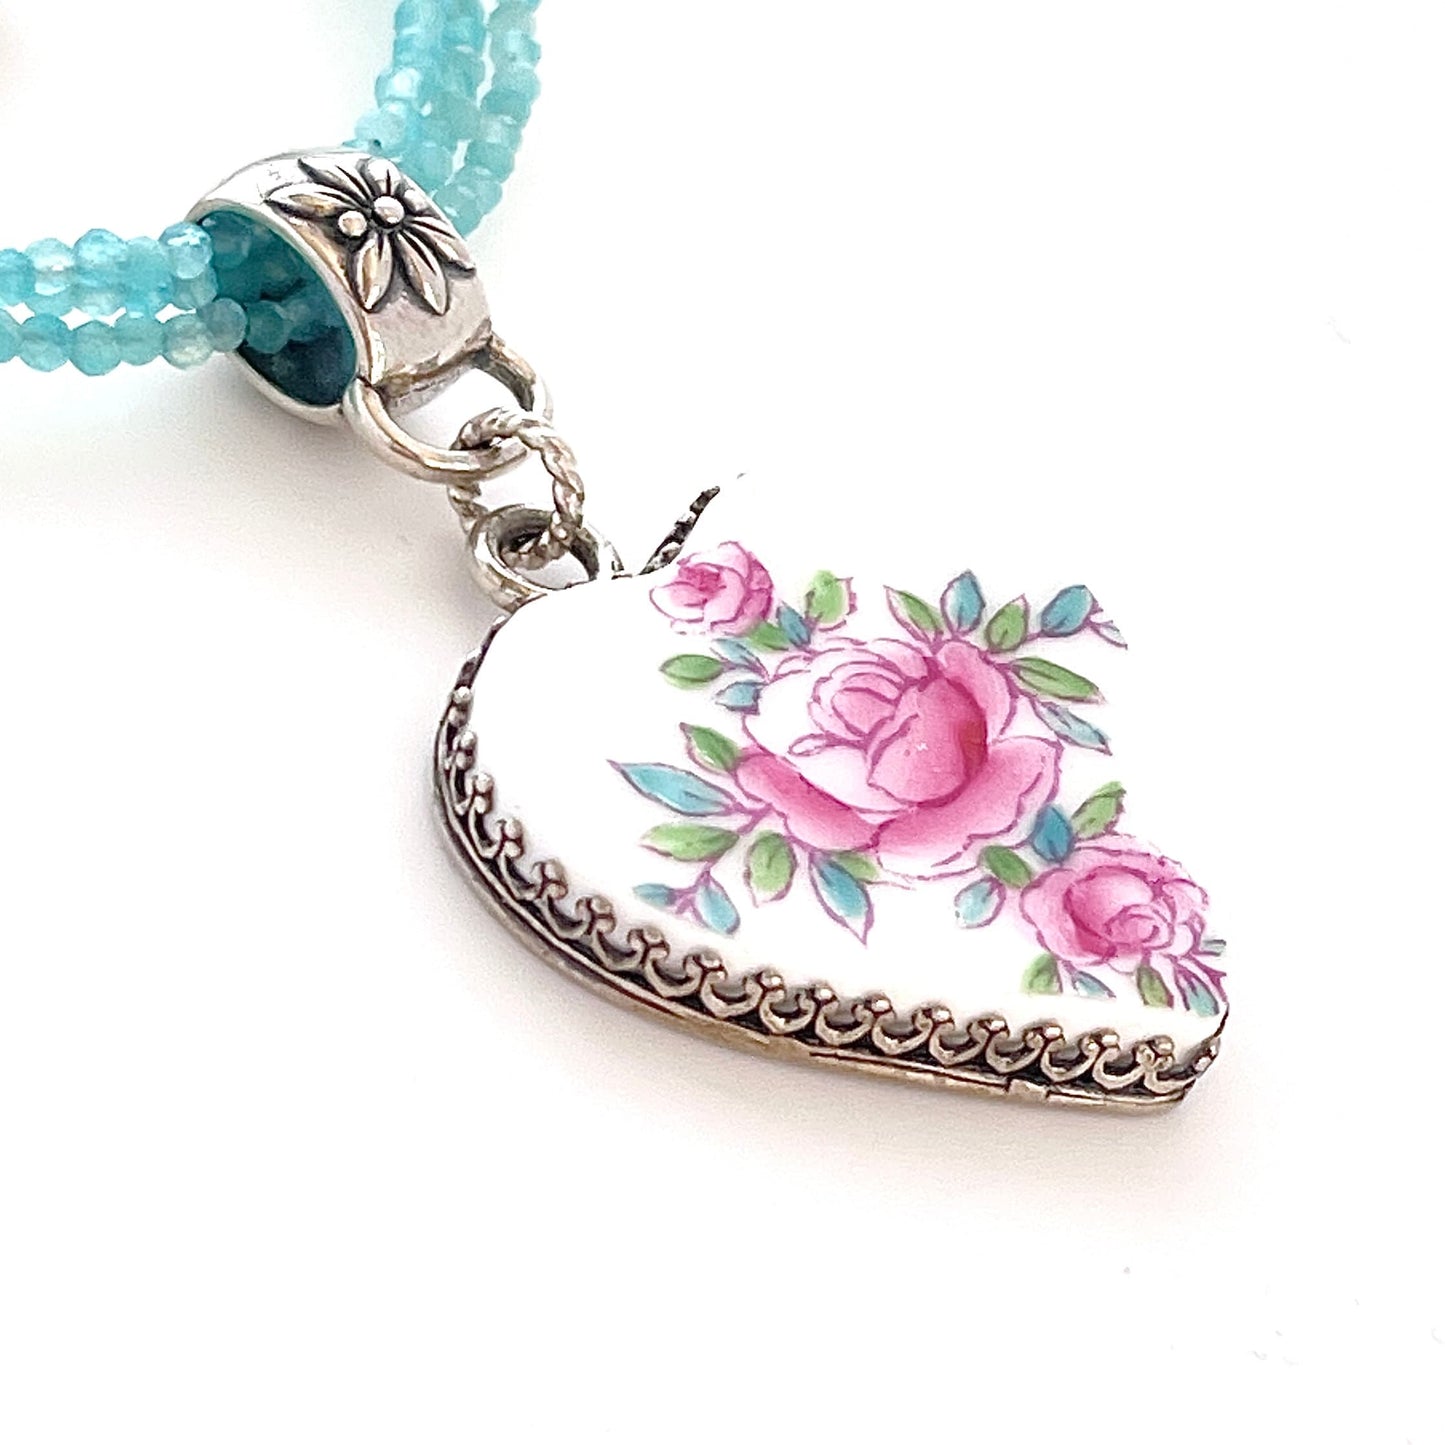 Minton China Persian Rose Broken China Jewelry, 20th Anniversary Gift for Wife, Romantic Heart Necklace